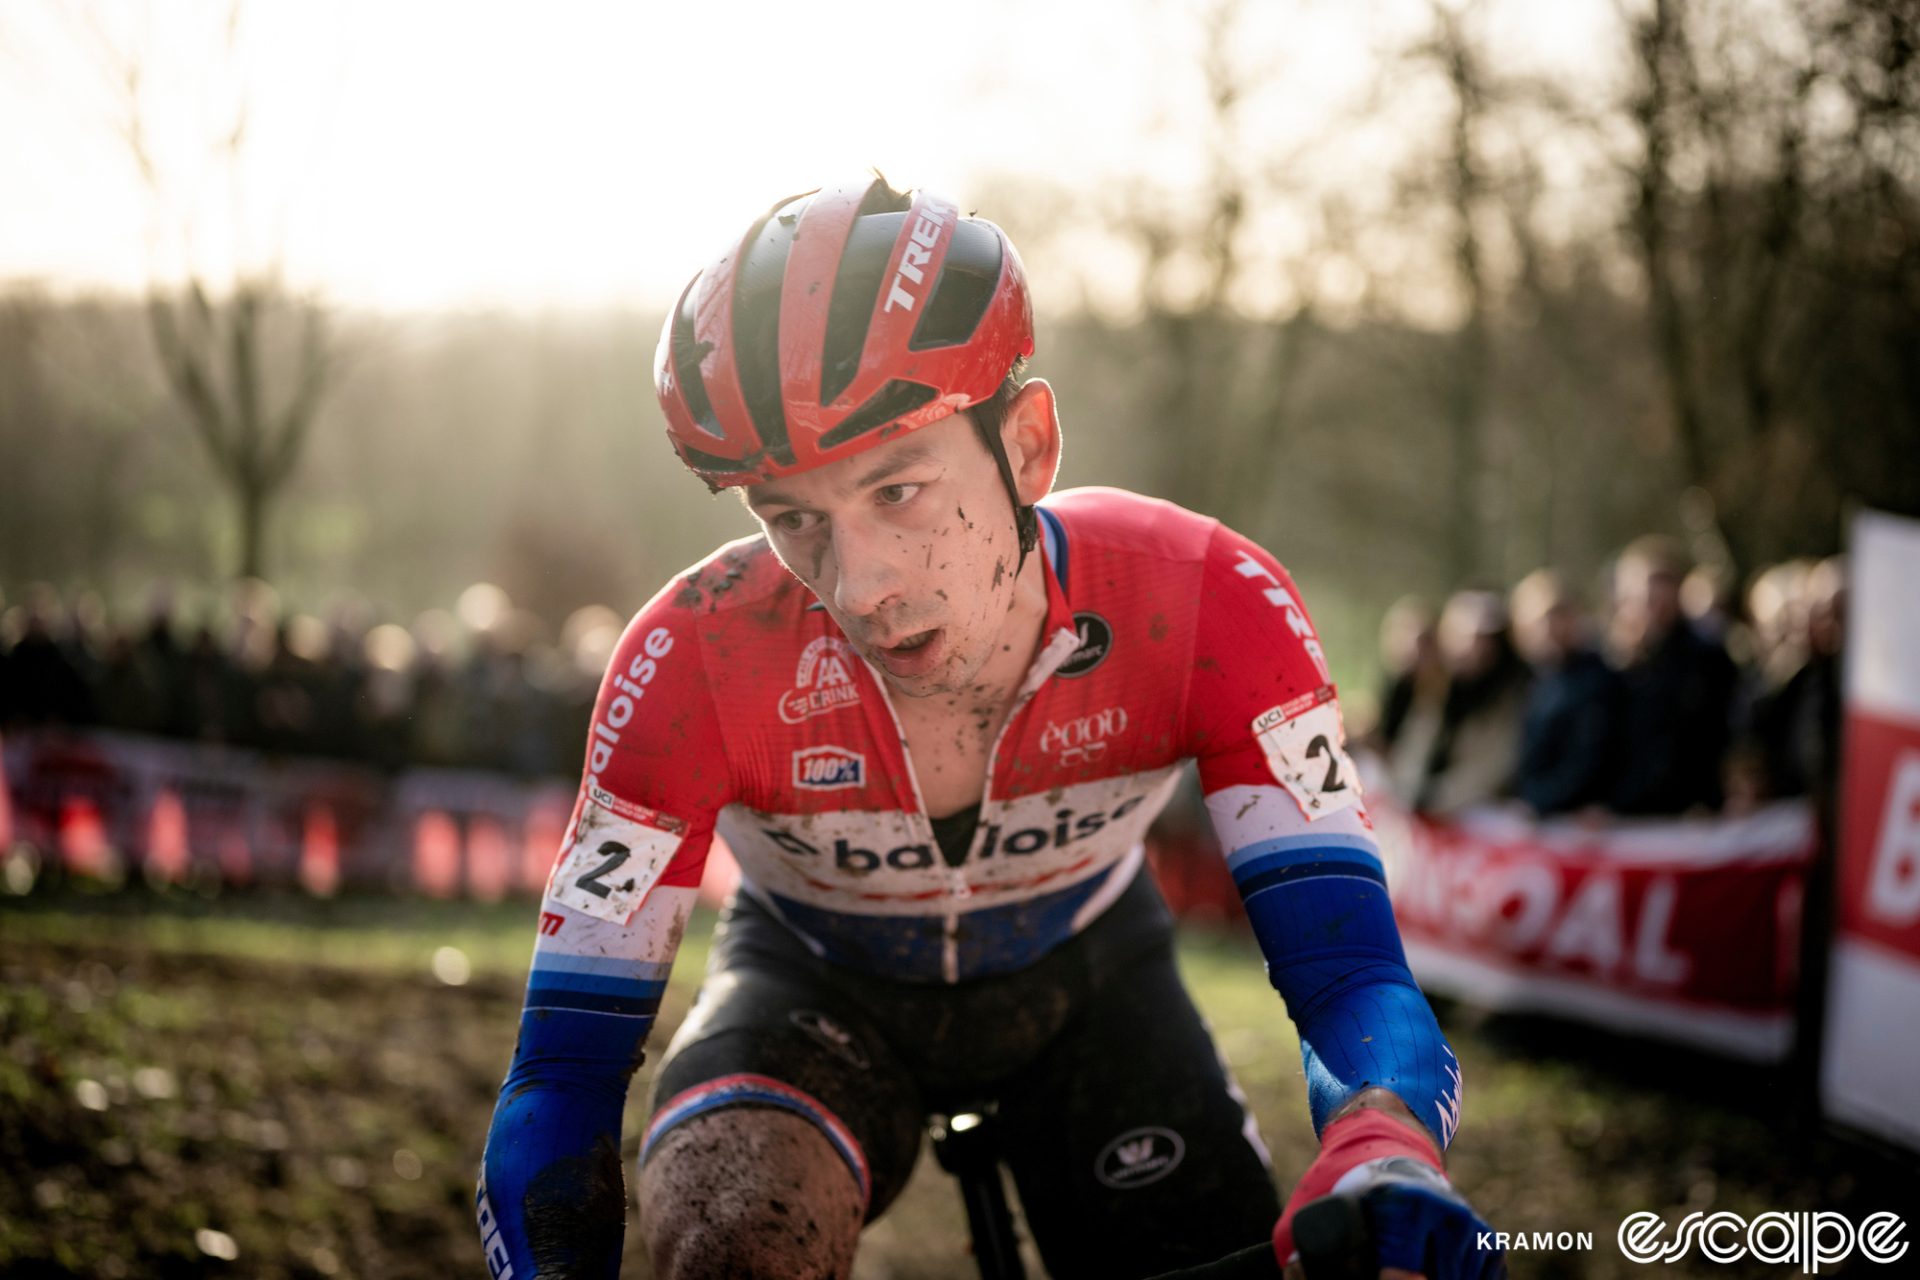 Lars van der Haar climbs a muddy section. He's shown in close-up, with warm soft light behind him.